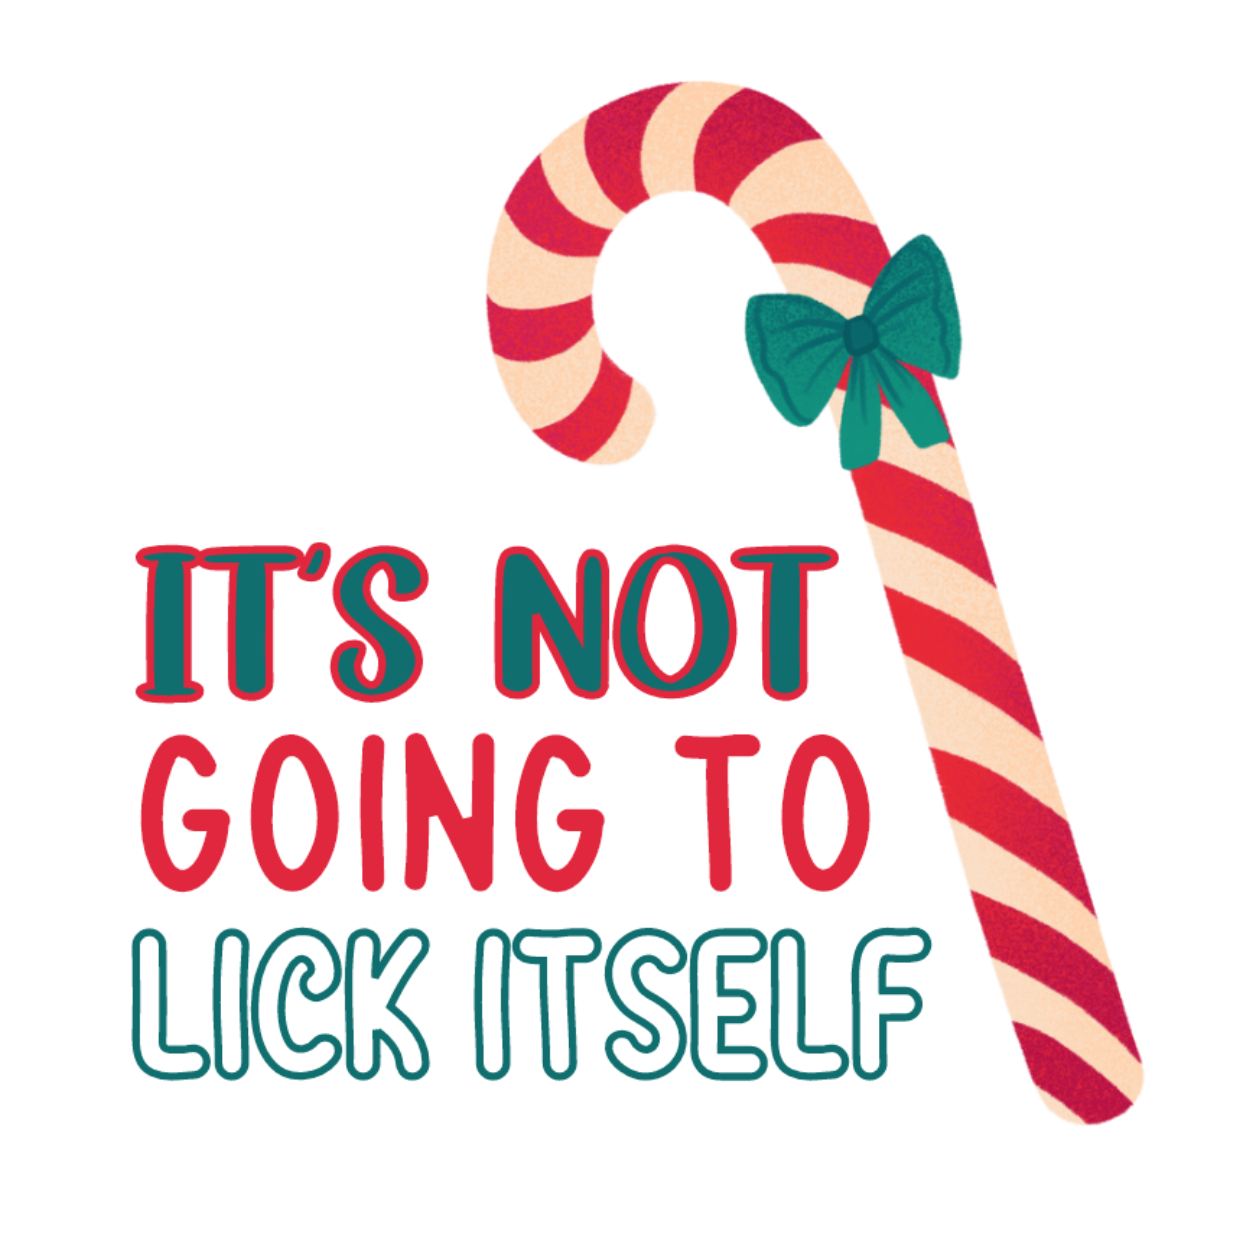 It's Not Going To Lick Itself